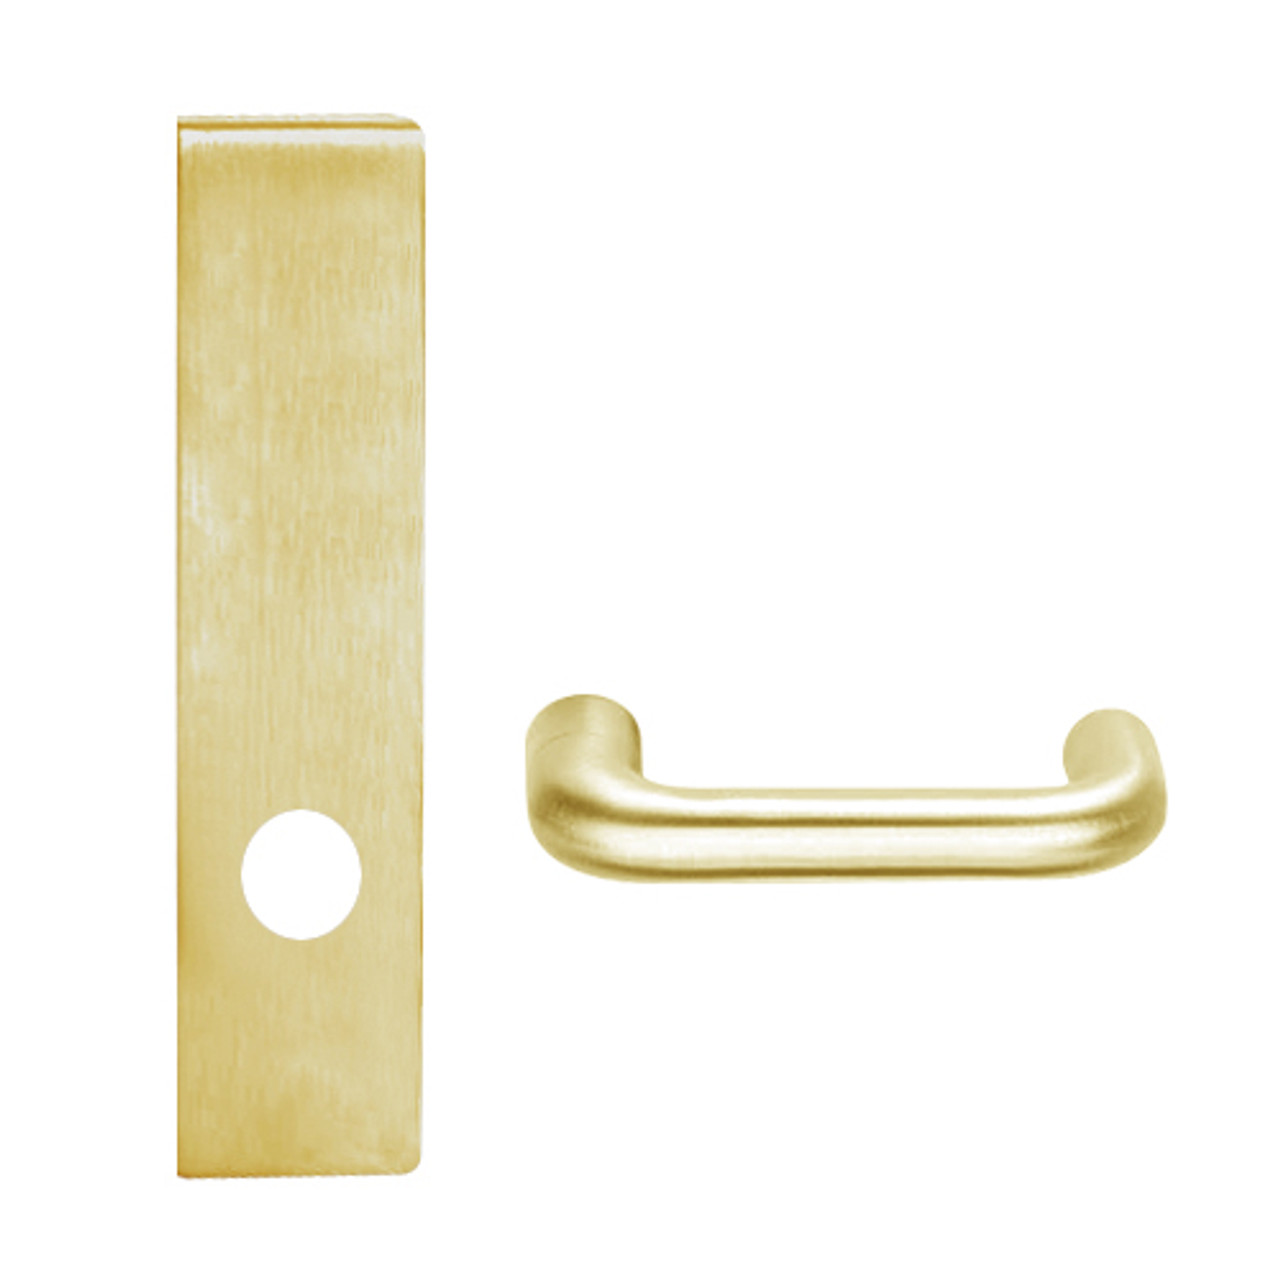 L9025-03L-606 Schlage L Series Exit Commercial Mortise Lock with 03 Cast Lever Design in Satin Brass